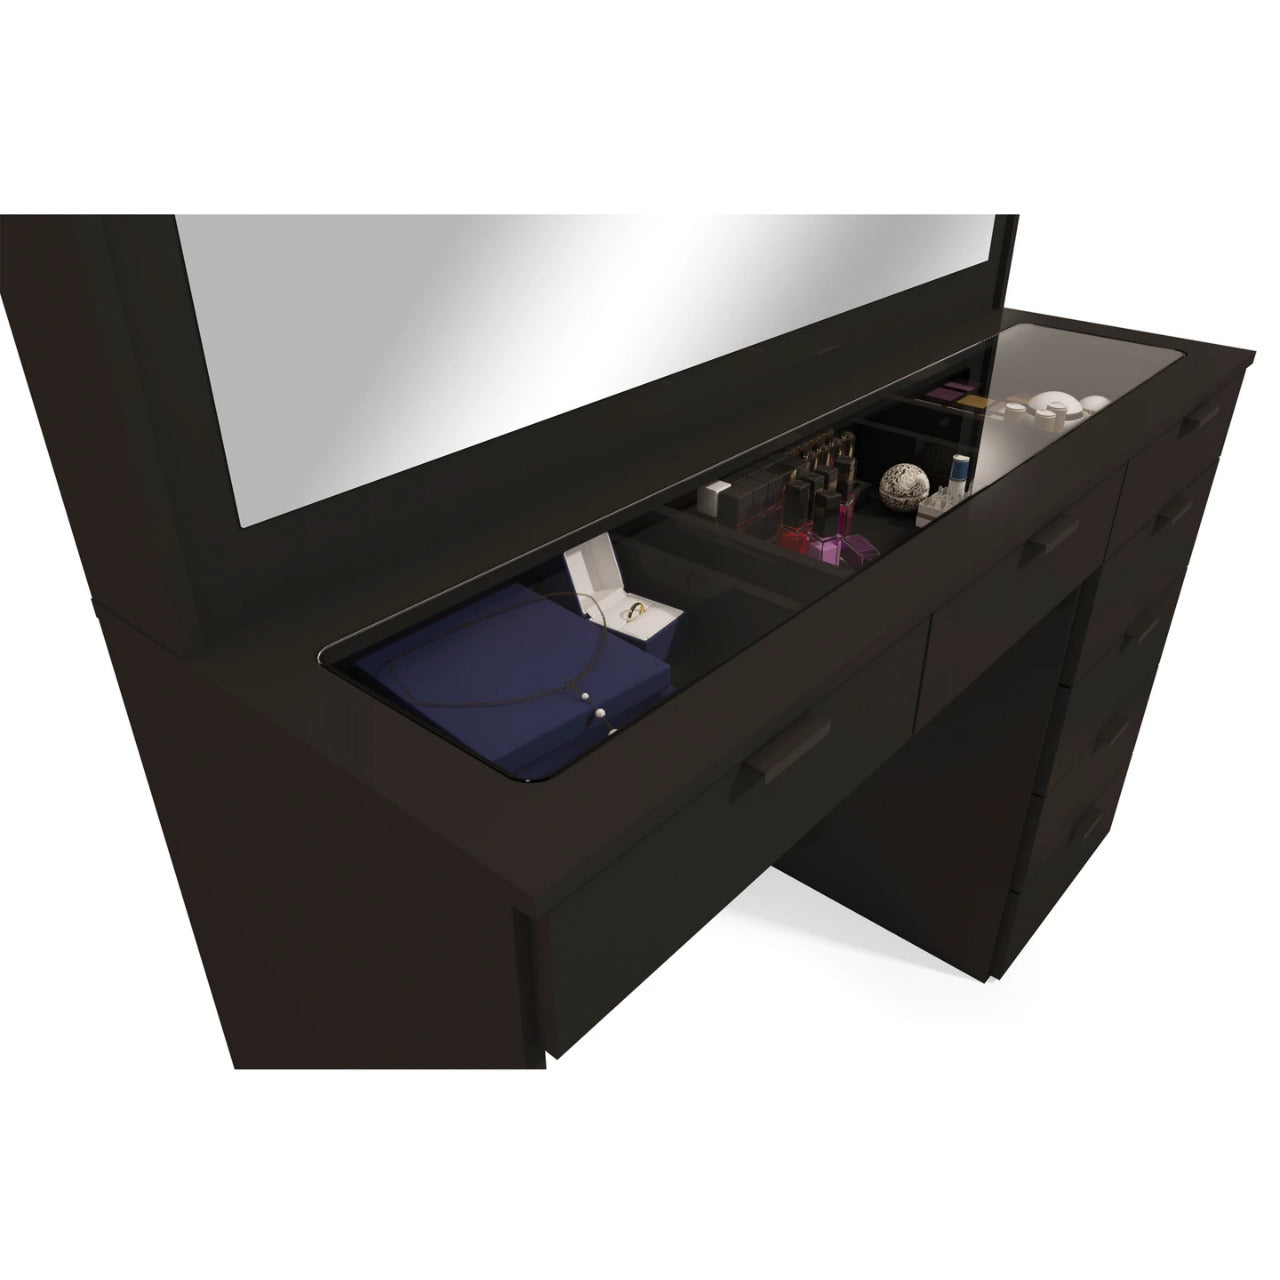 Makeup Vanity: Lighted Vanity with Glass Top  Dressing Table